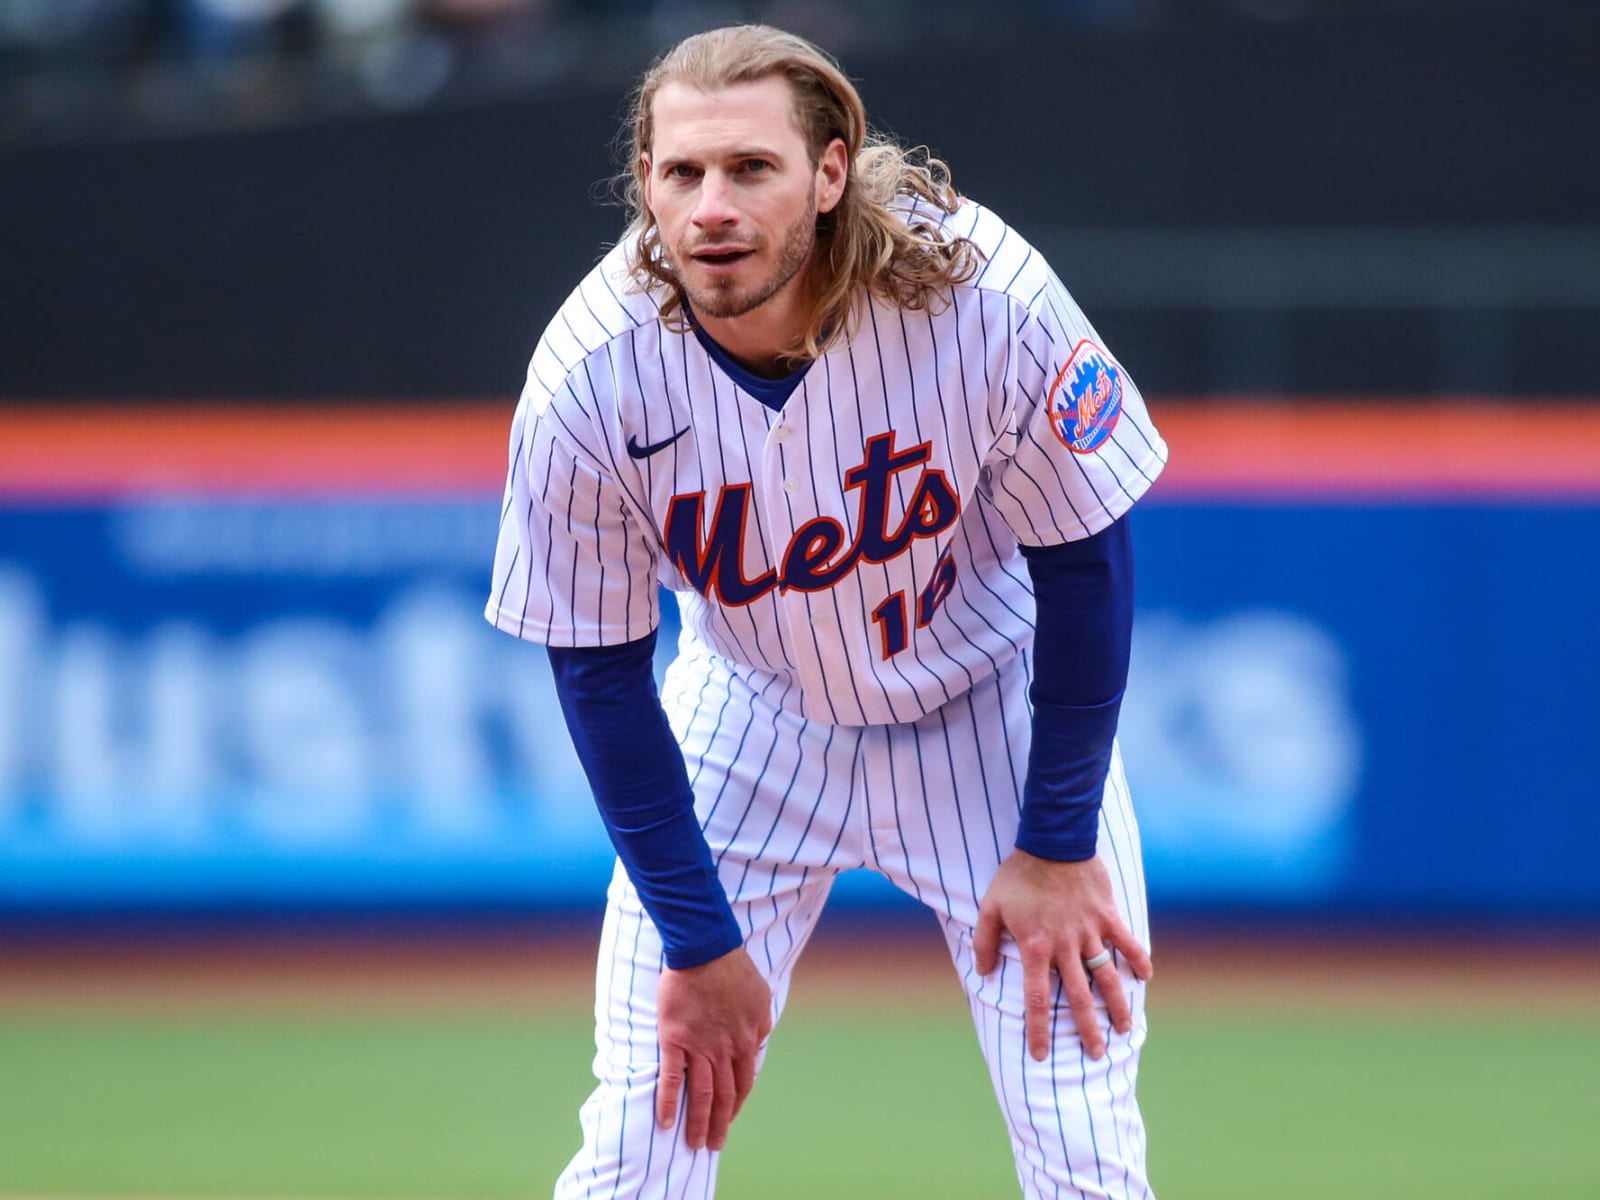 Mets' Janowski out 6-8 weeks following hand surgery